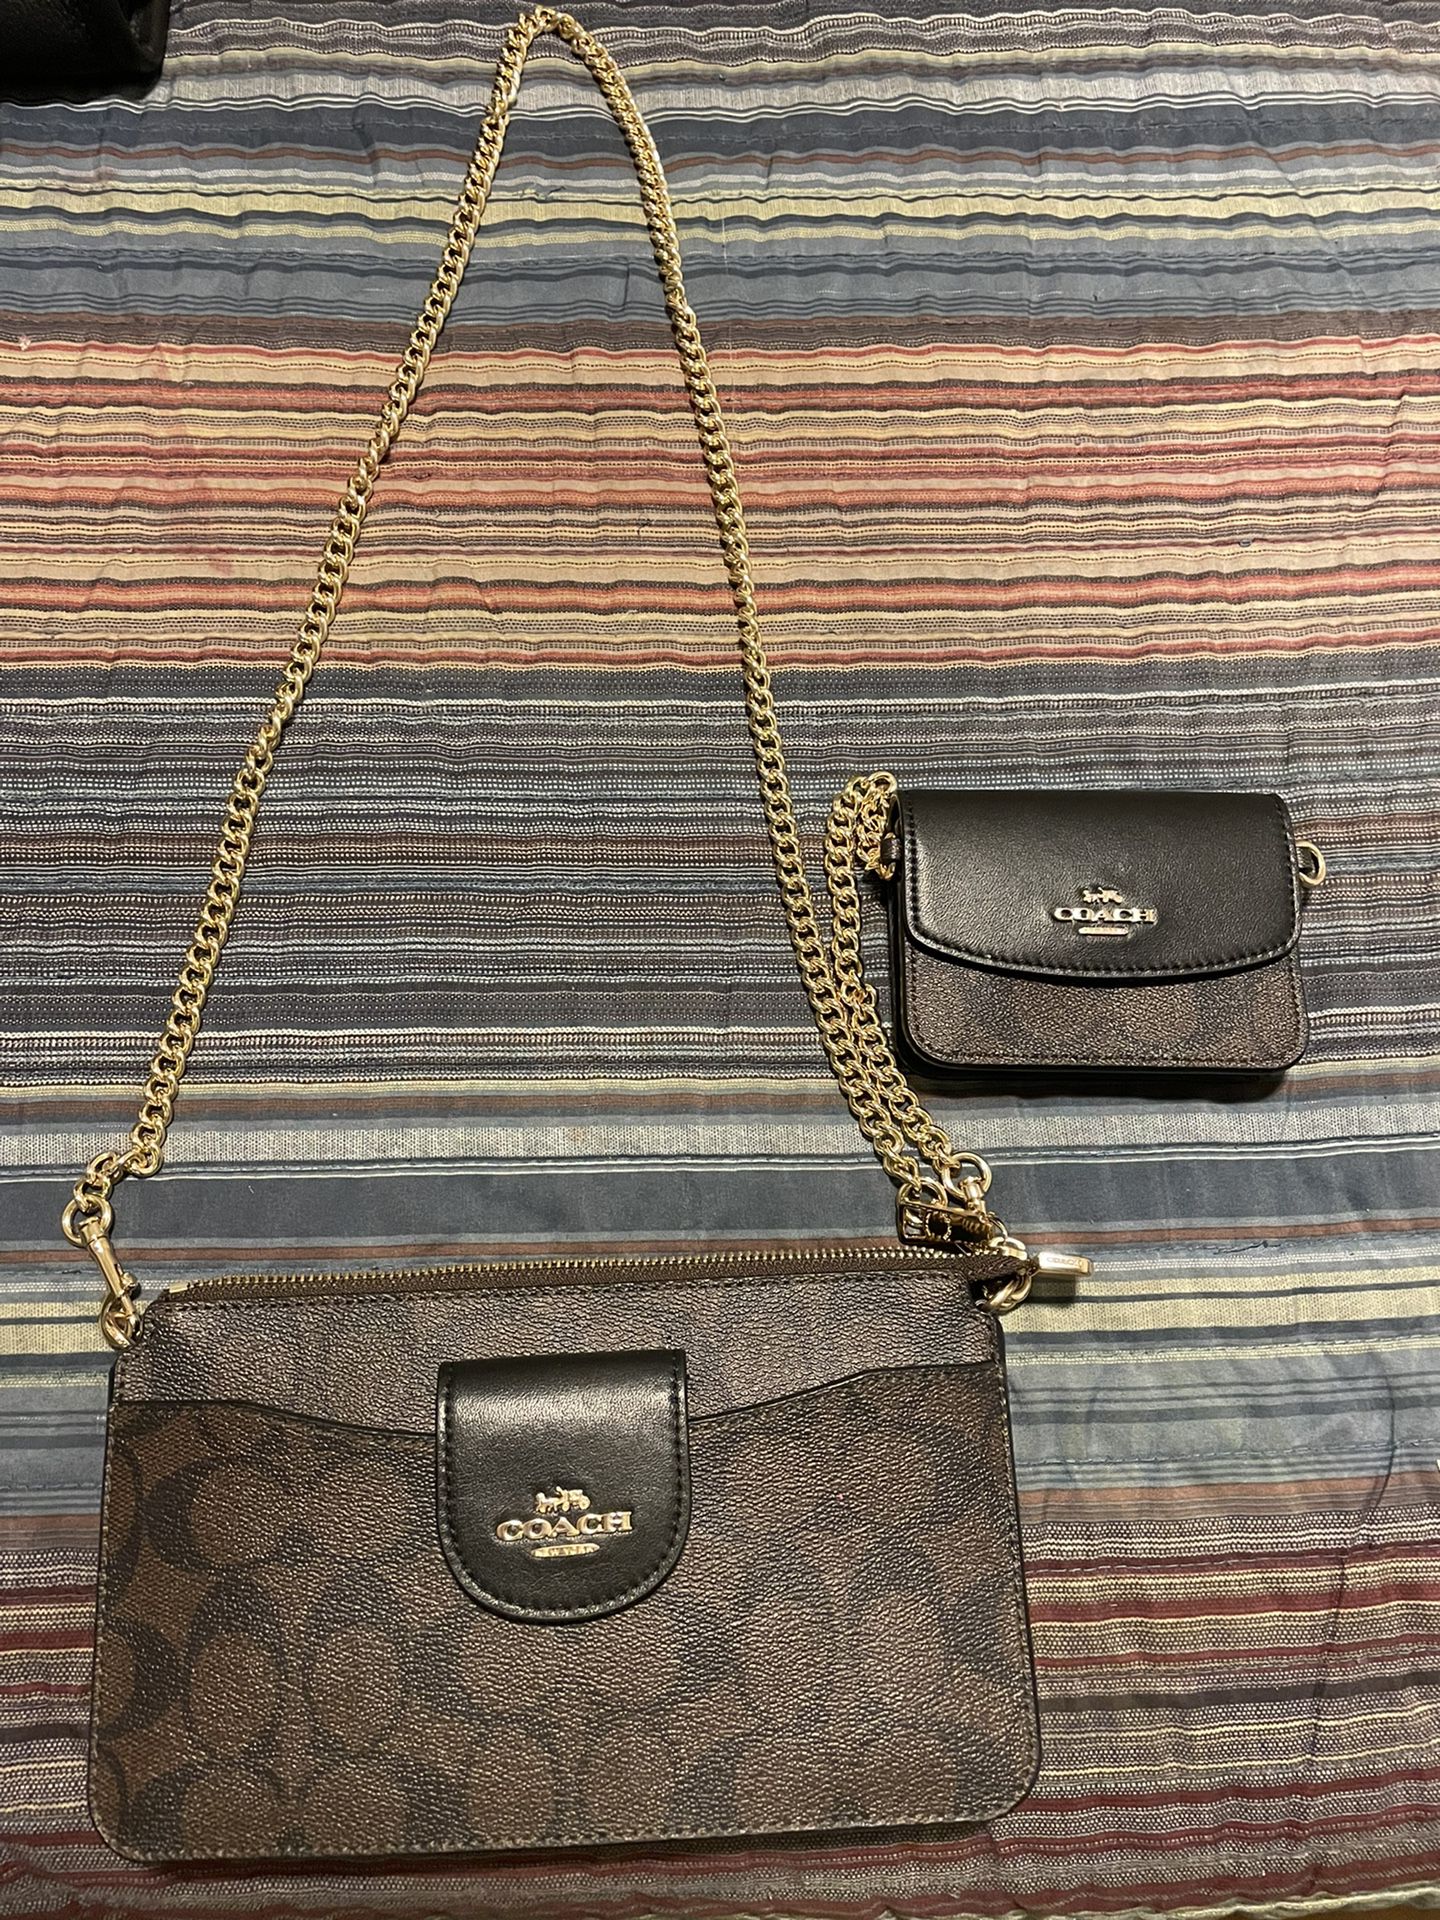 Coach Purse With Matching Wallet